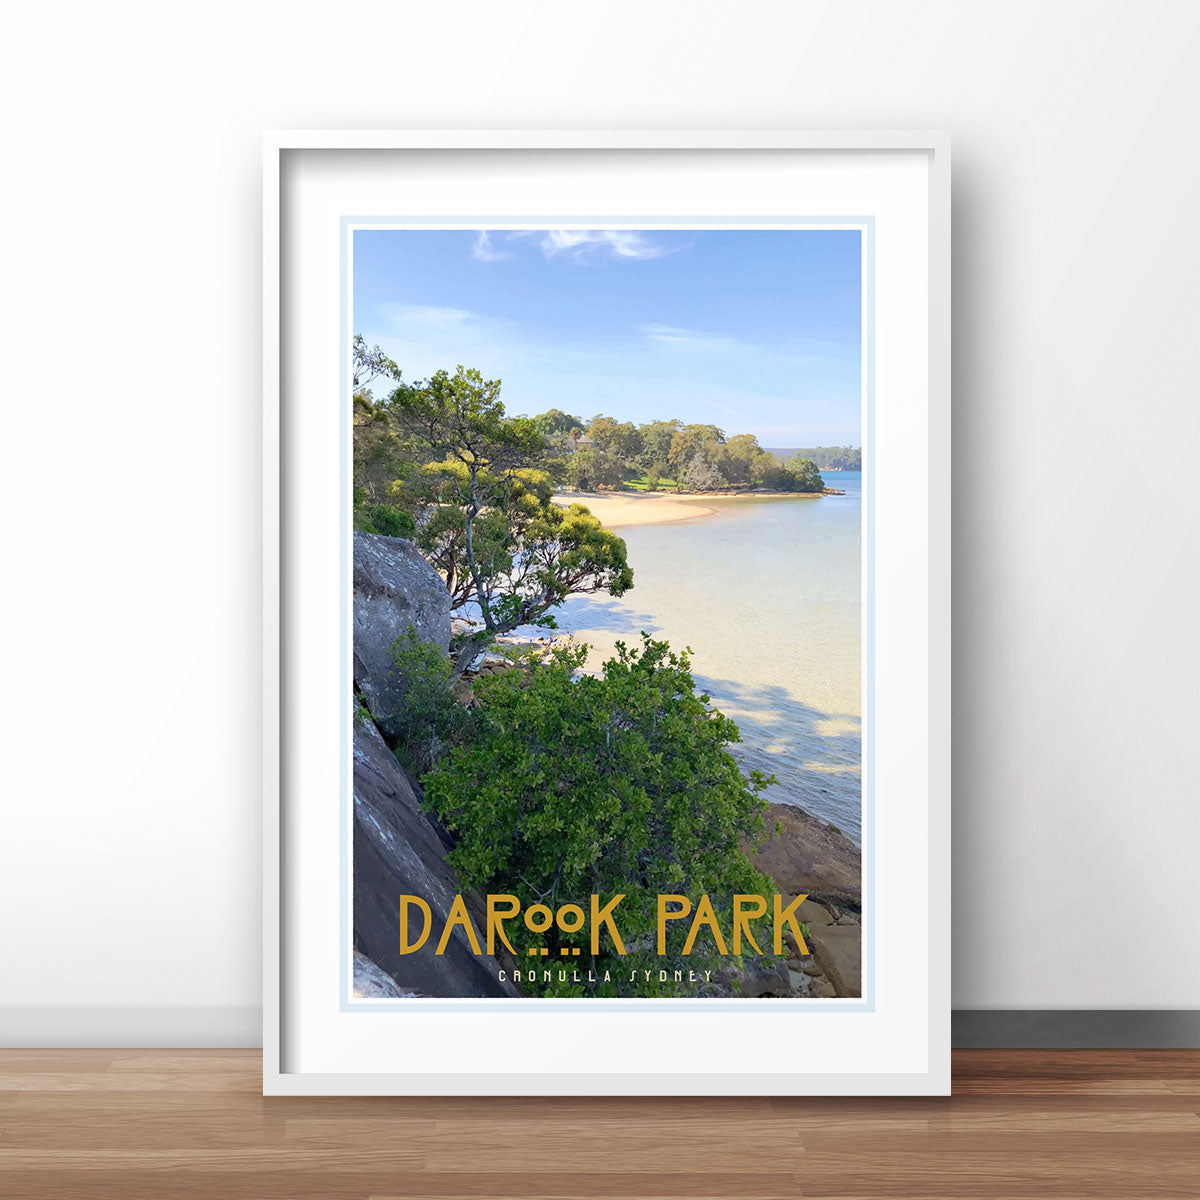 Cronulla Darook Park white framed print travel style by places we luv